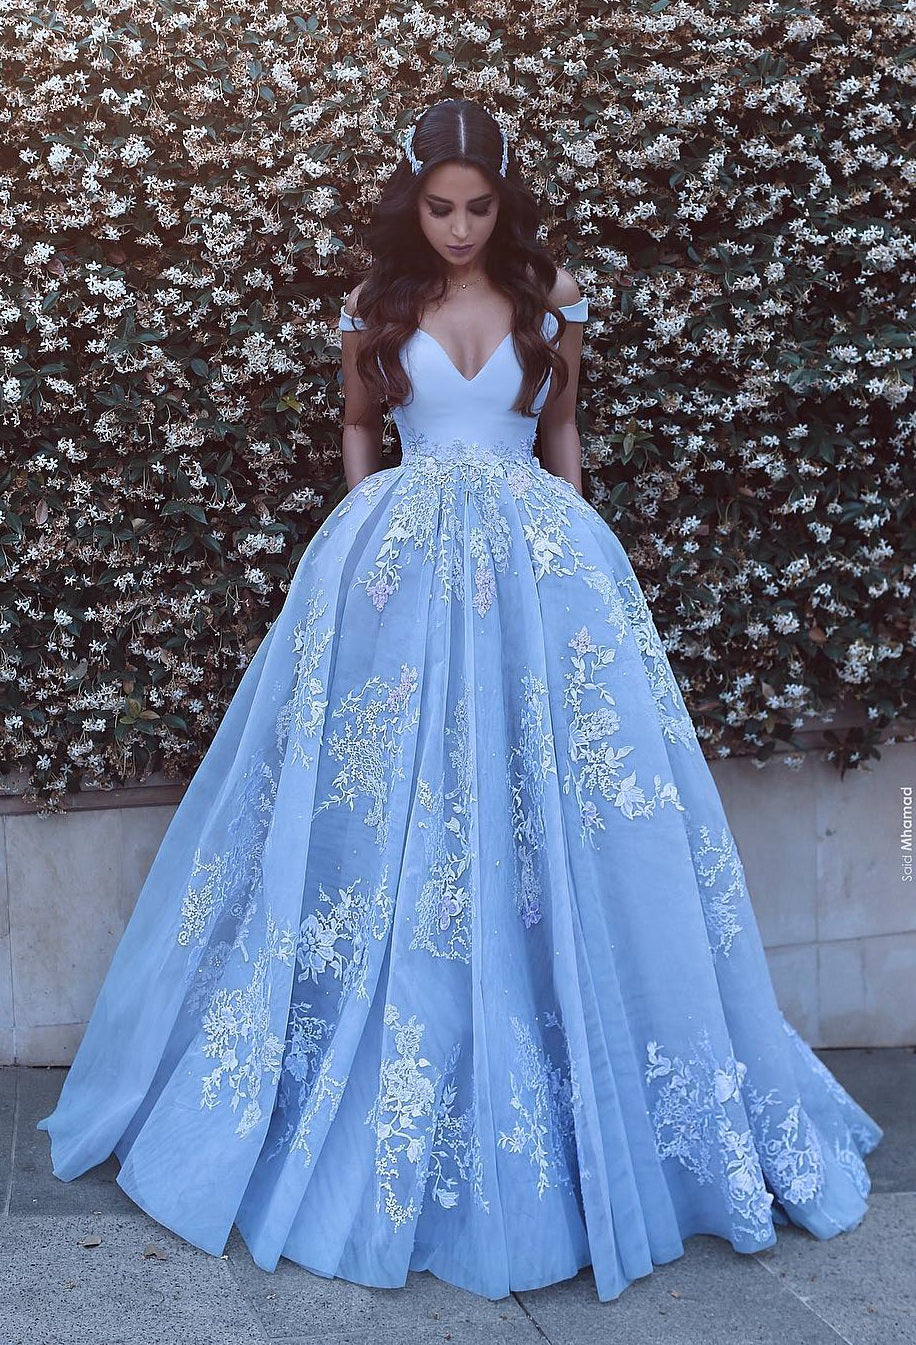 Lace Prom Dresses Long, Evening Dress ,Winter Formal Dress, Pageant Dance Dresses, Graduation School Party Gown, PC0275 - Promcoming